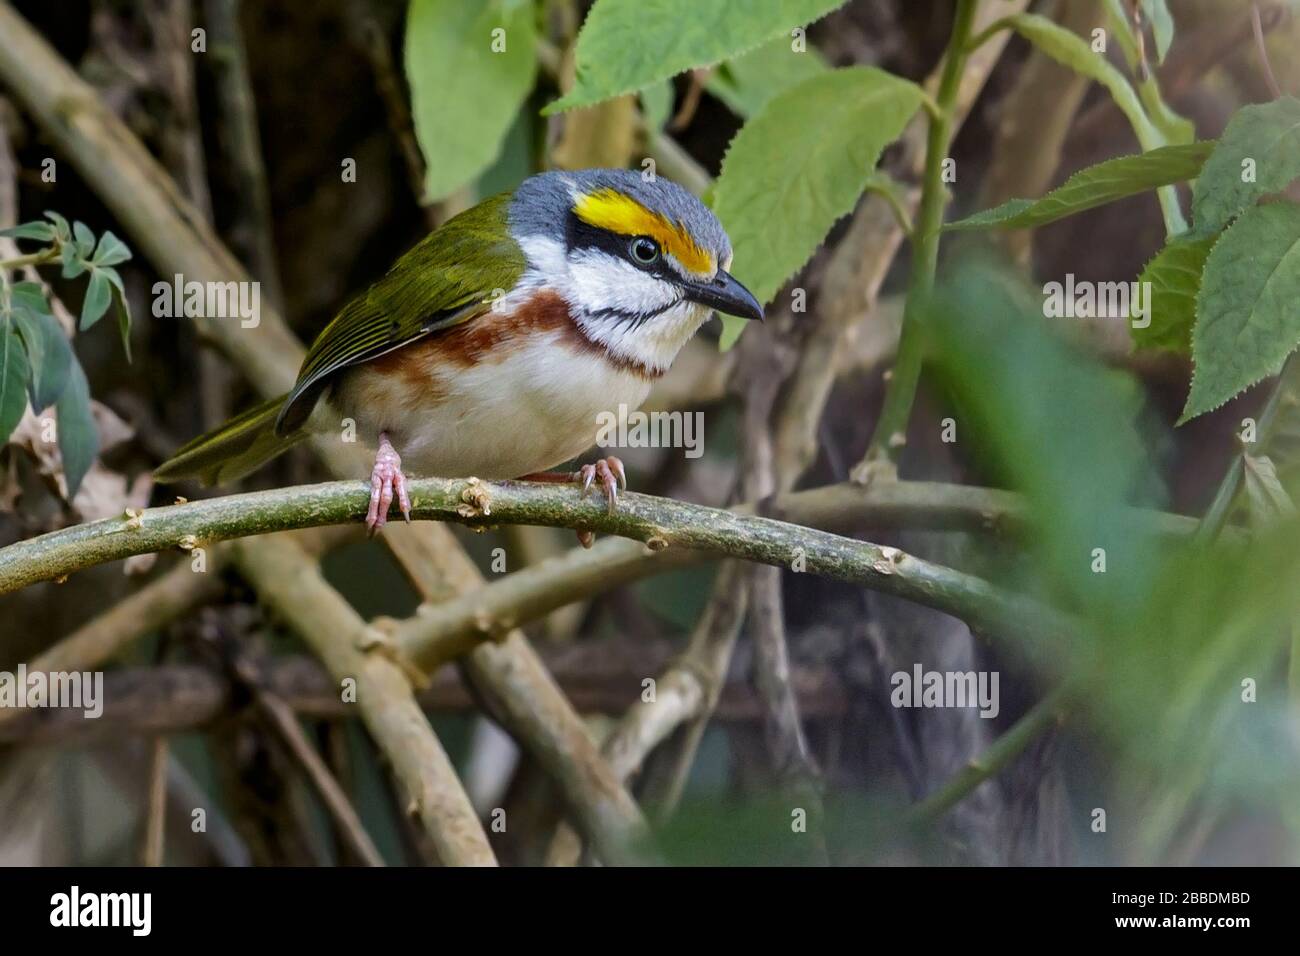 Chestnut-sided Shrike-Vireo (Vireolanius melitophrys) perched on a branch in Guatemala in Central America. Stock Photo